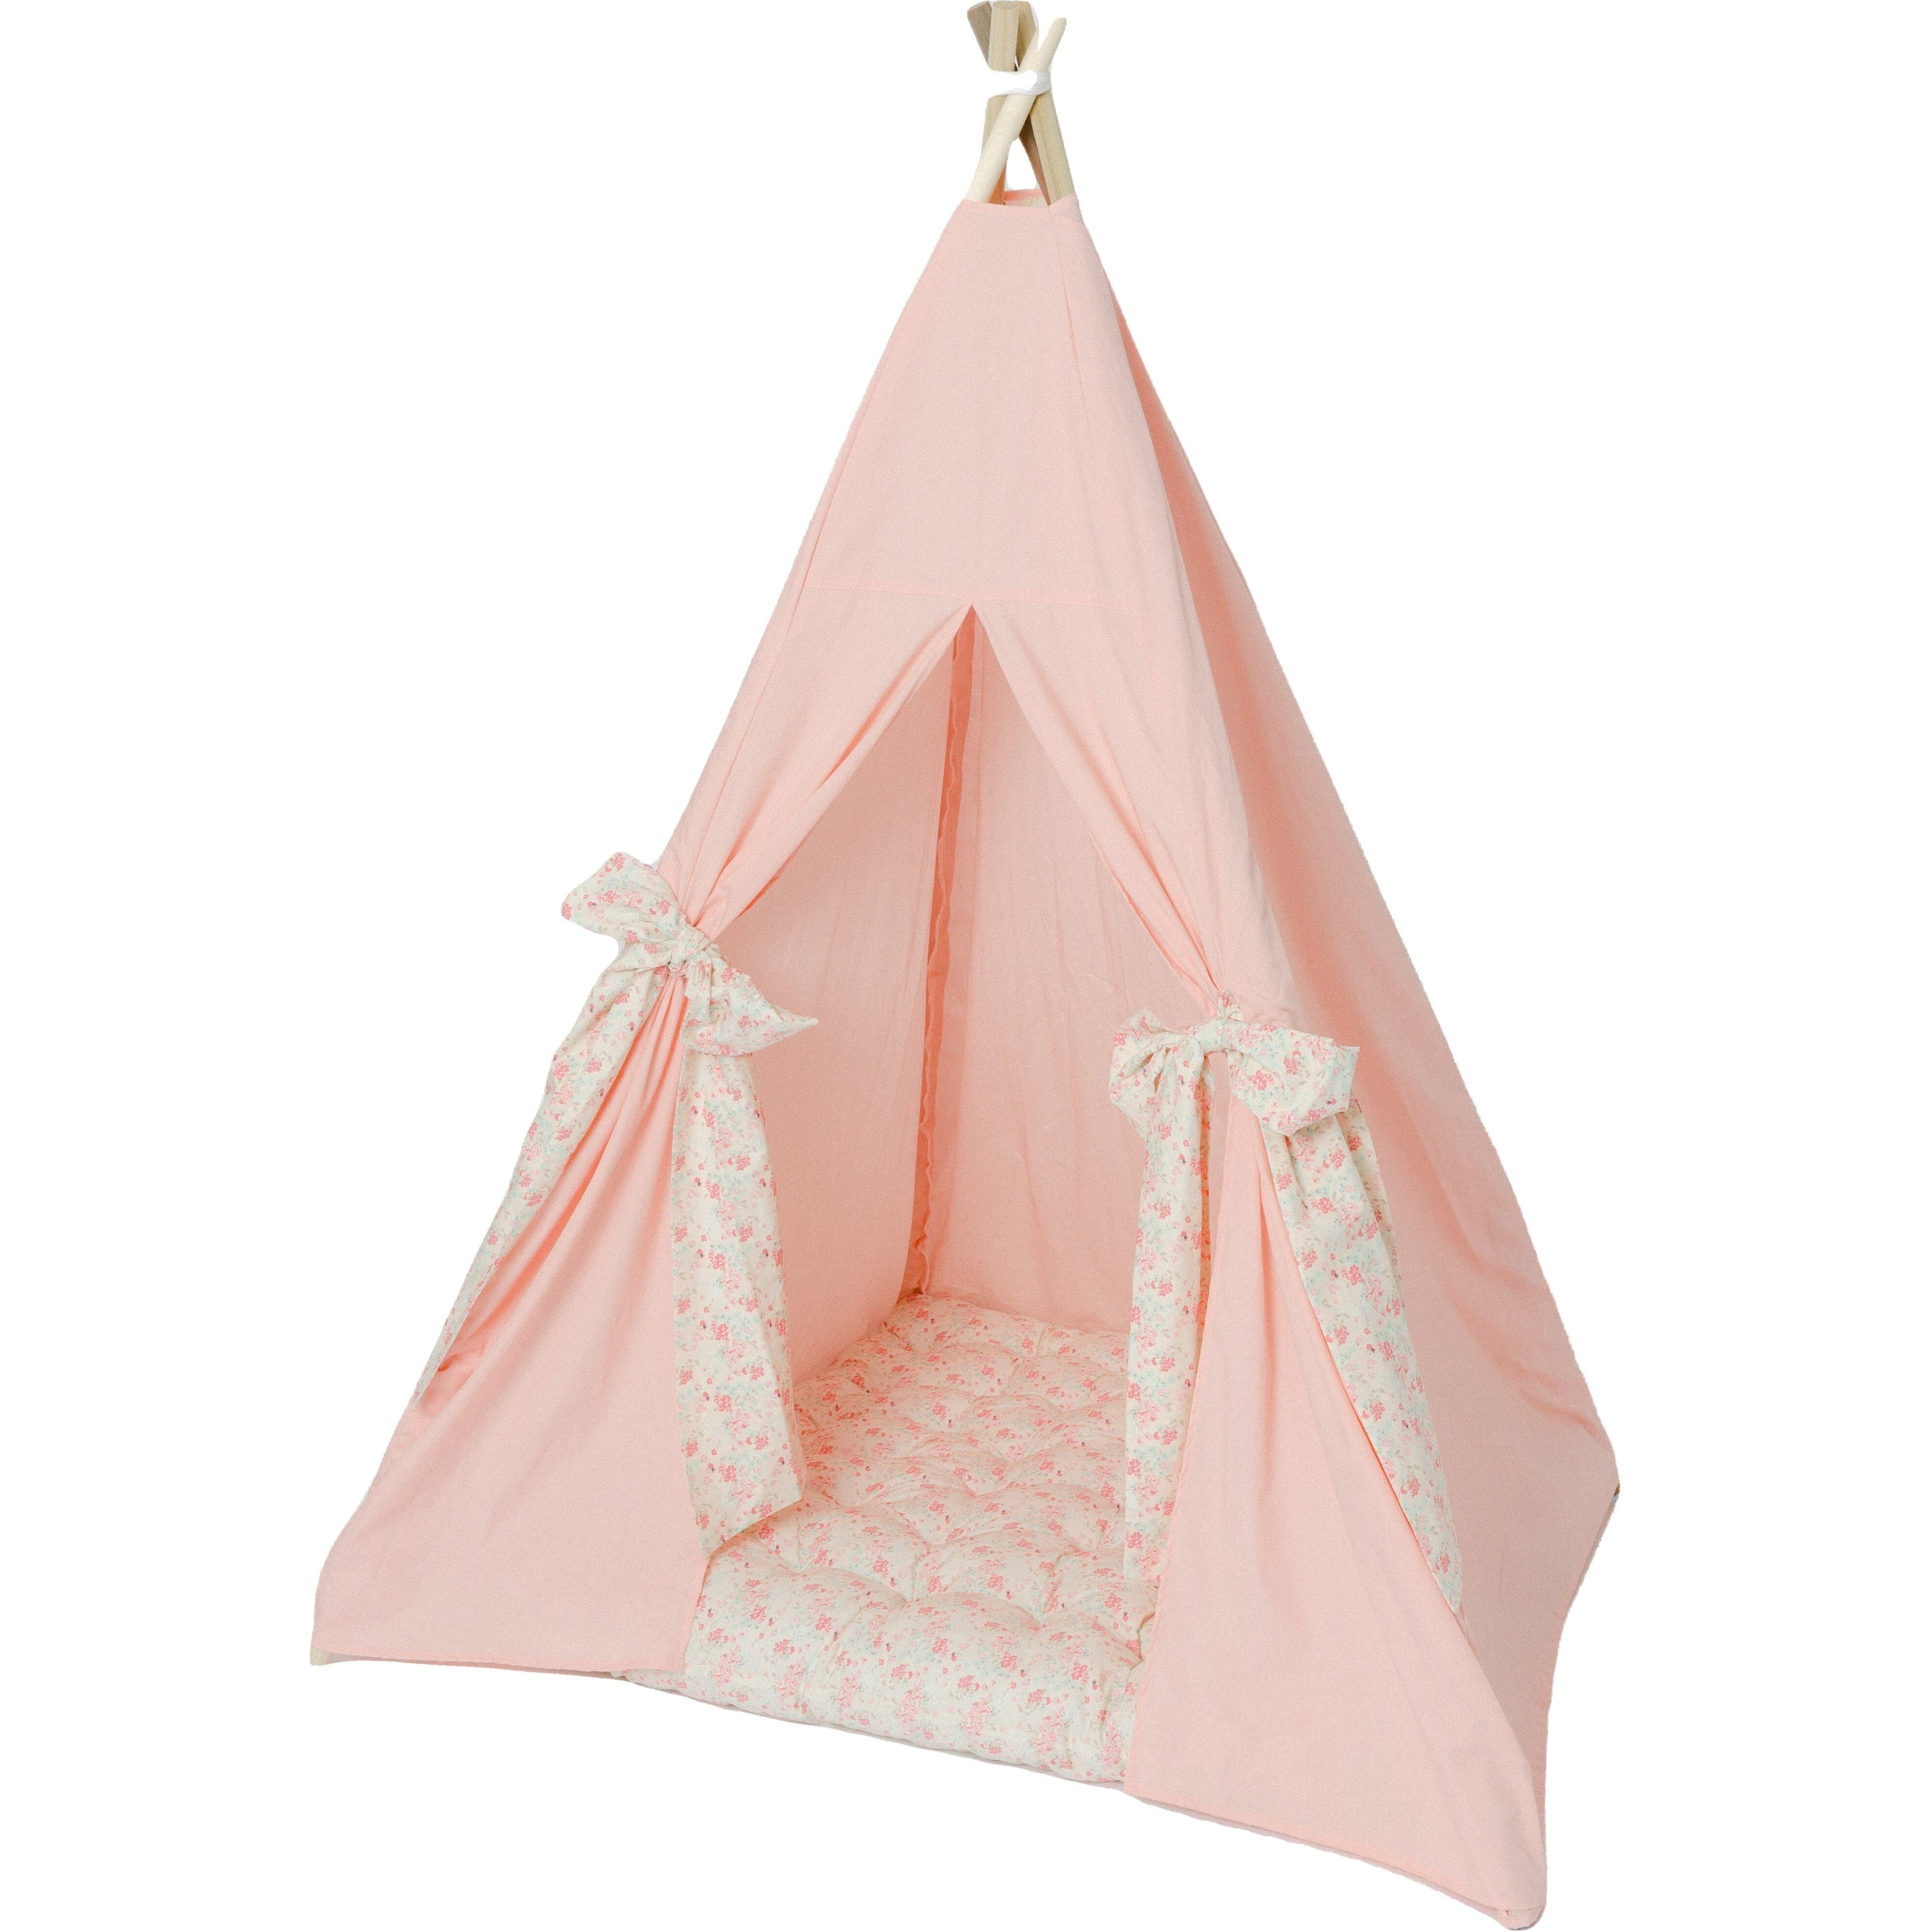 The Chloe Play Tent